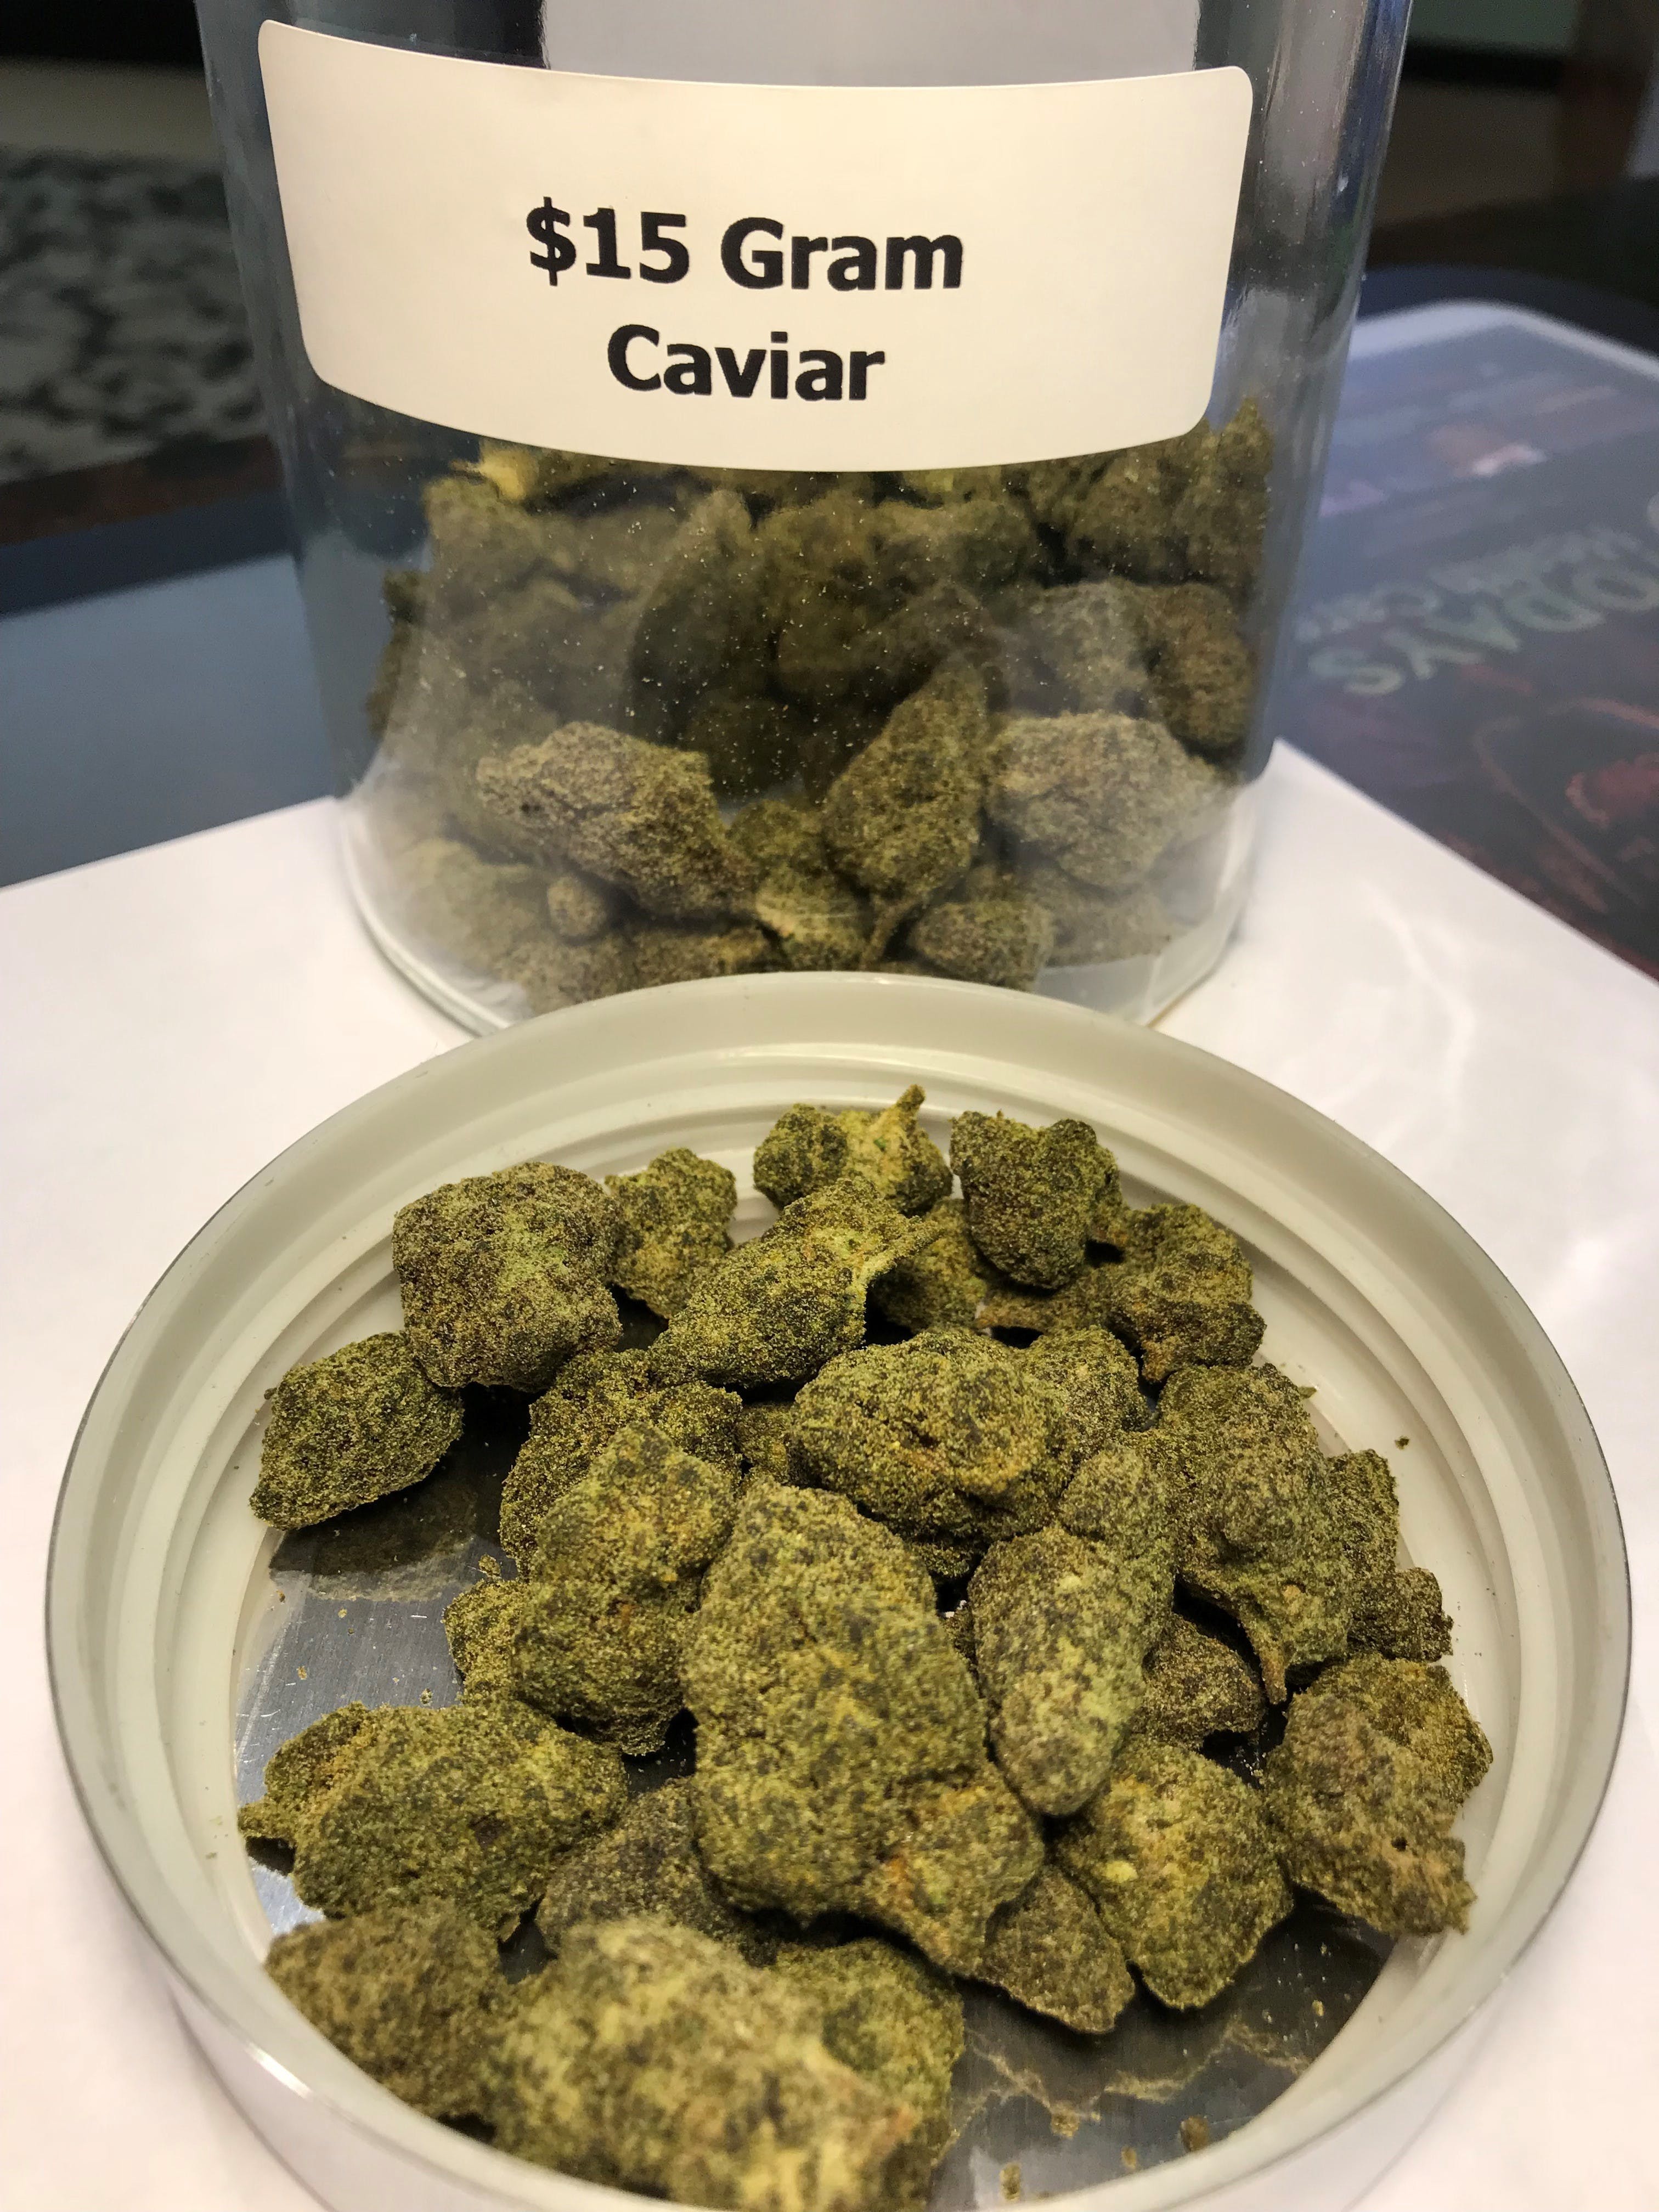 marijuana-dispensaries-the-green-source-lll-in-colorado-springs-thc-pineapple-express-caviar-in-house